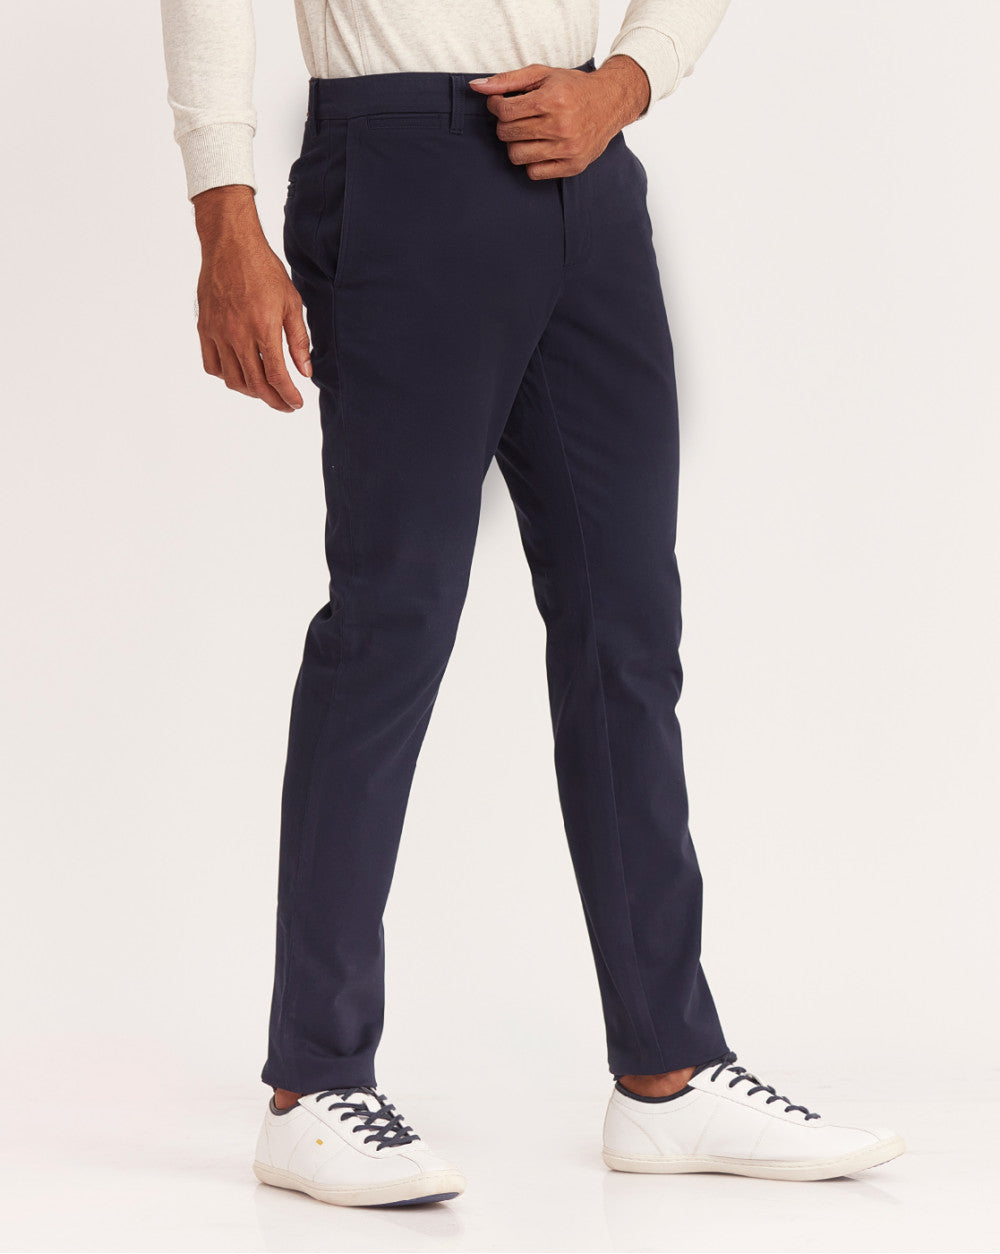 Tapered Fit Urban Chinos - Navy